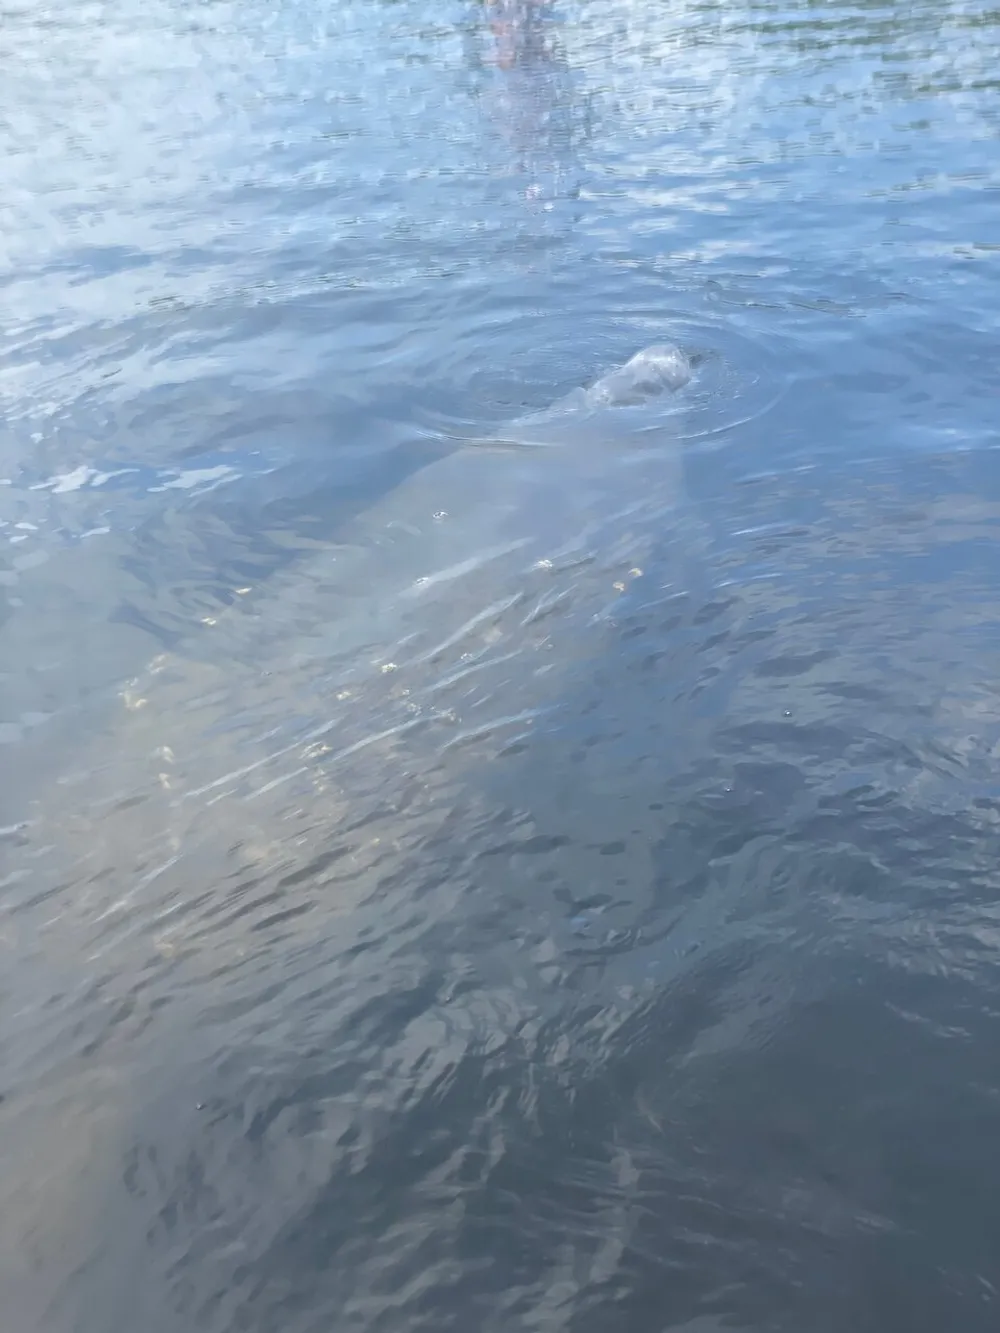 The image shows the calm surface of a body of water with a manatee visible just below the surface creating a swirl as it moves